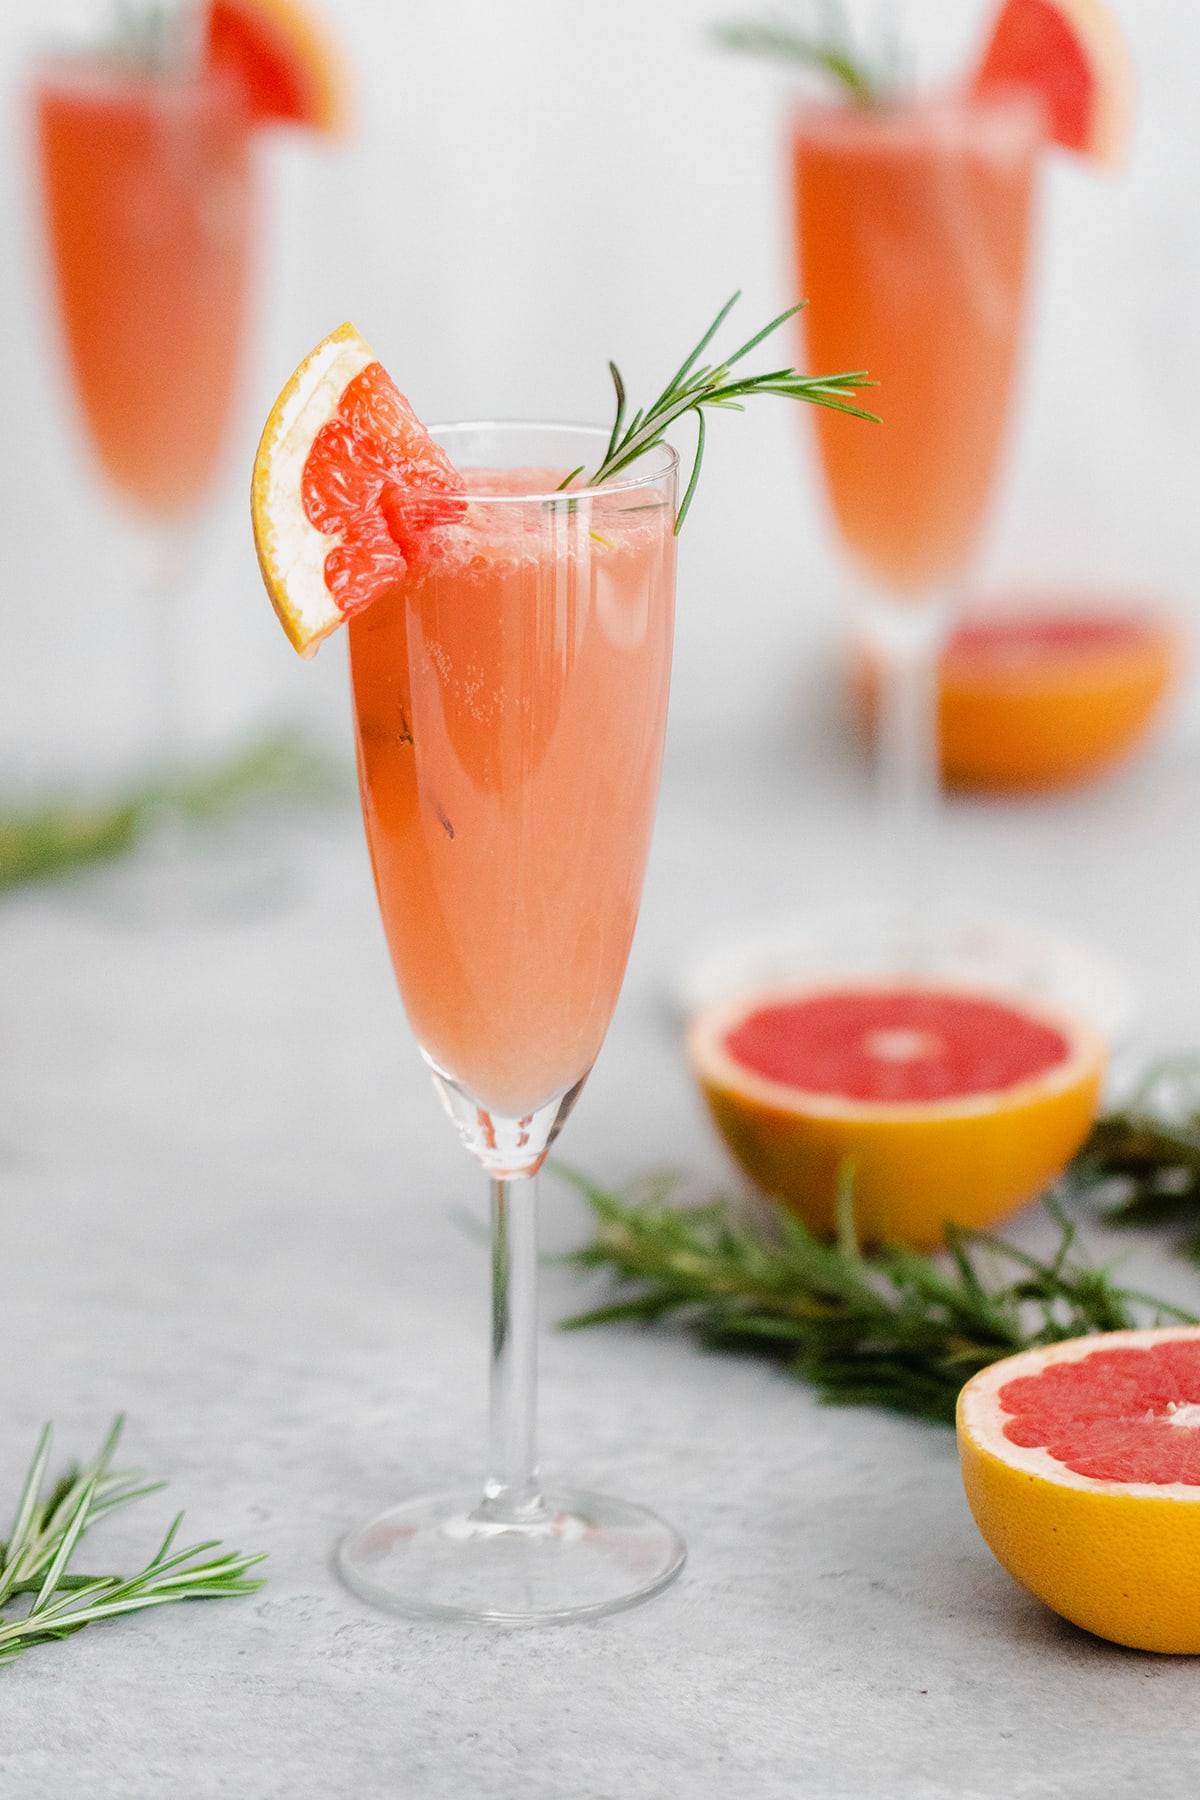 Grapefruit Mimosa in 3 flute glasses garnished with fresh rosemary and a quarter of a slice of grapefruit on the rim. Grapefruits as decoration in the background.